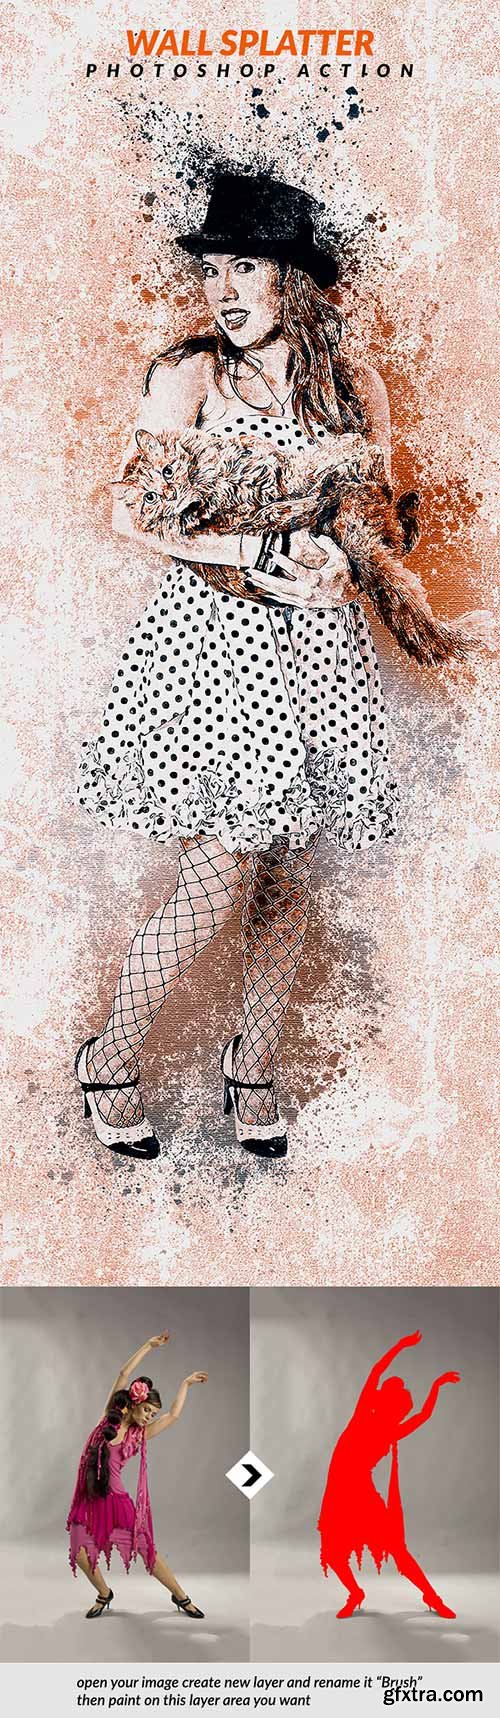 Graphicriver - Wall Splatter Photoshop Action 17253767